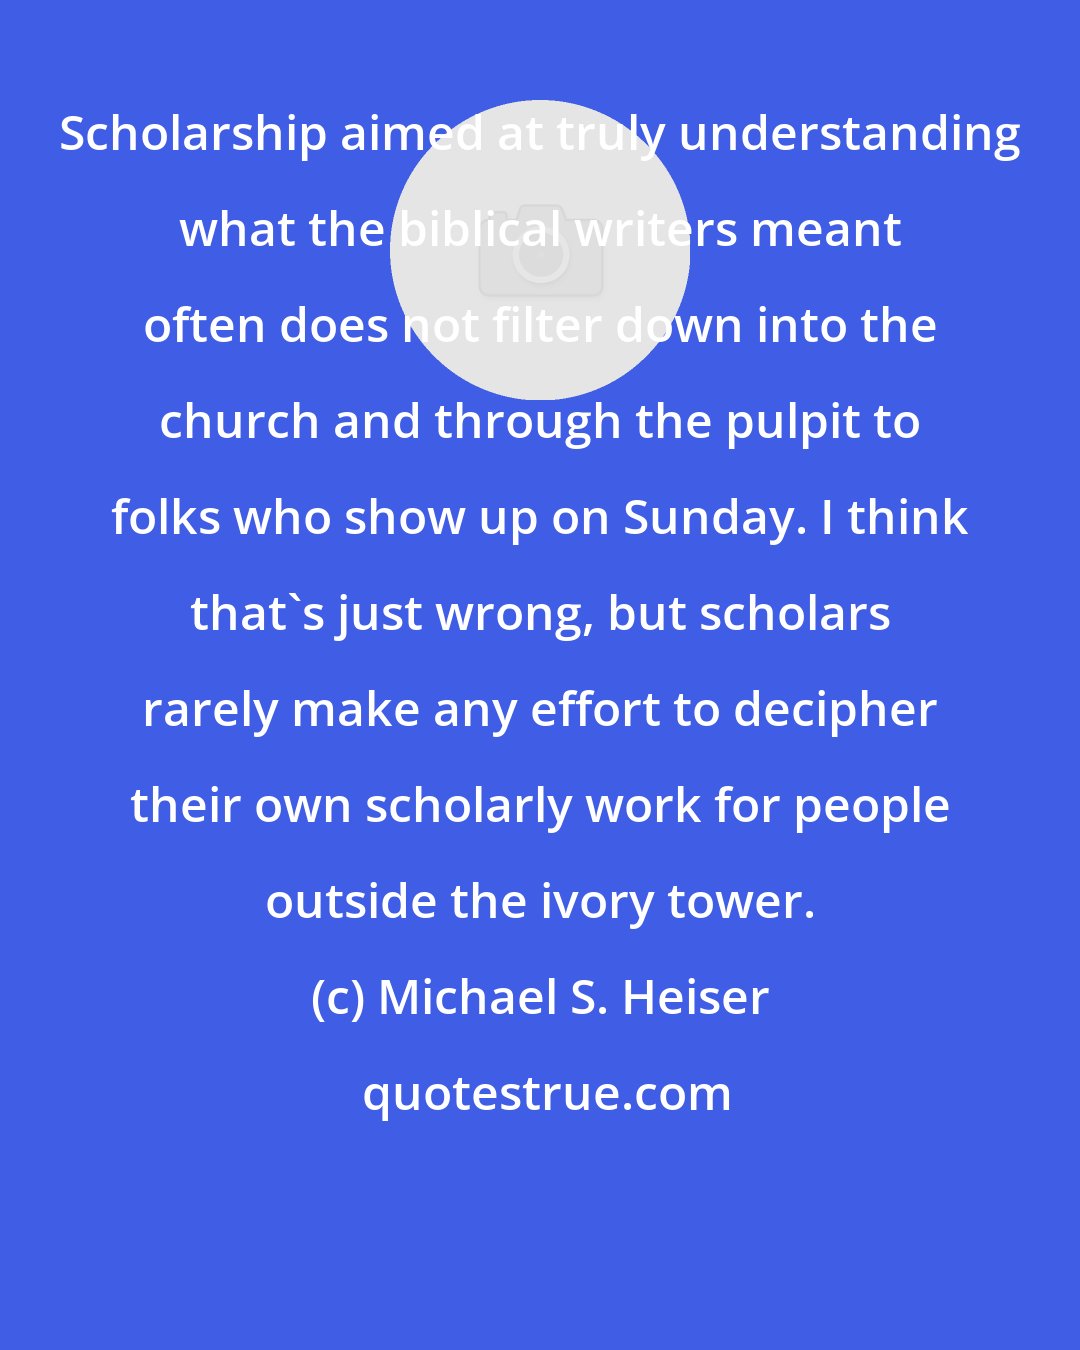 Michael S. Heiser: Scholarship aimed at truly understanding what the biblical writers meant often does not filter down into the church and through the pulpit to folks who show up on Sunday. I think that's just wrong, but scholars rarely make any effort to decipher their own scholarly work for people outside the ivory tower.